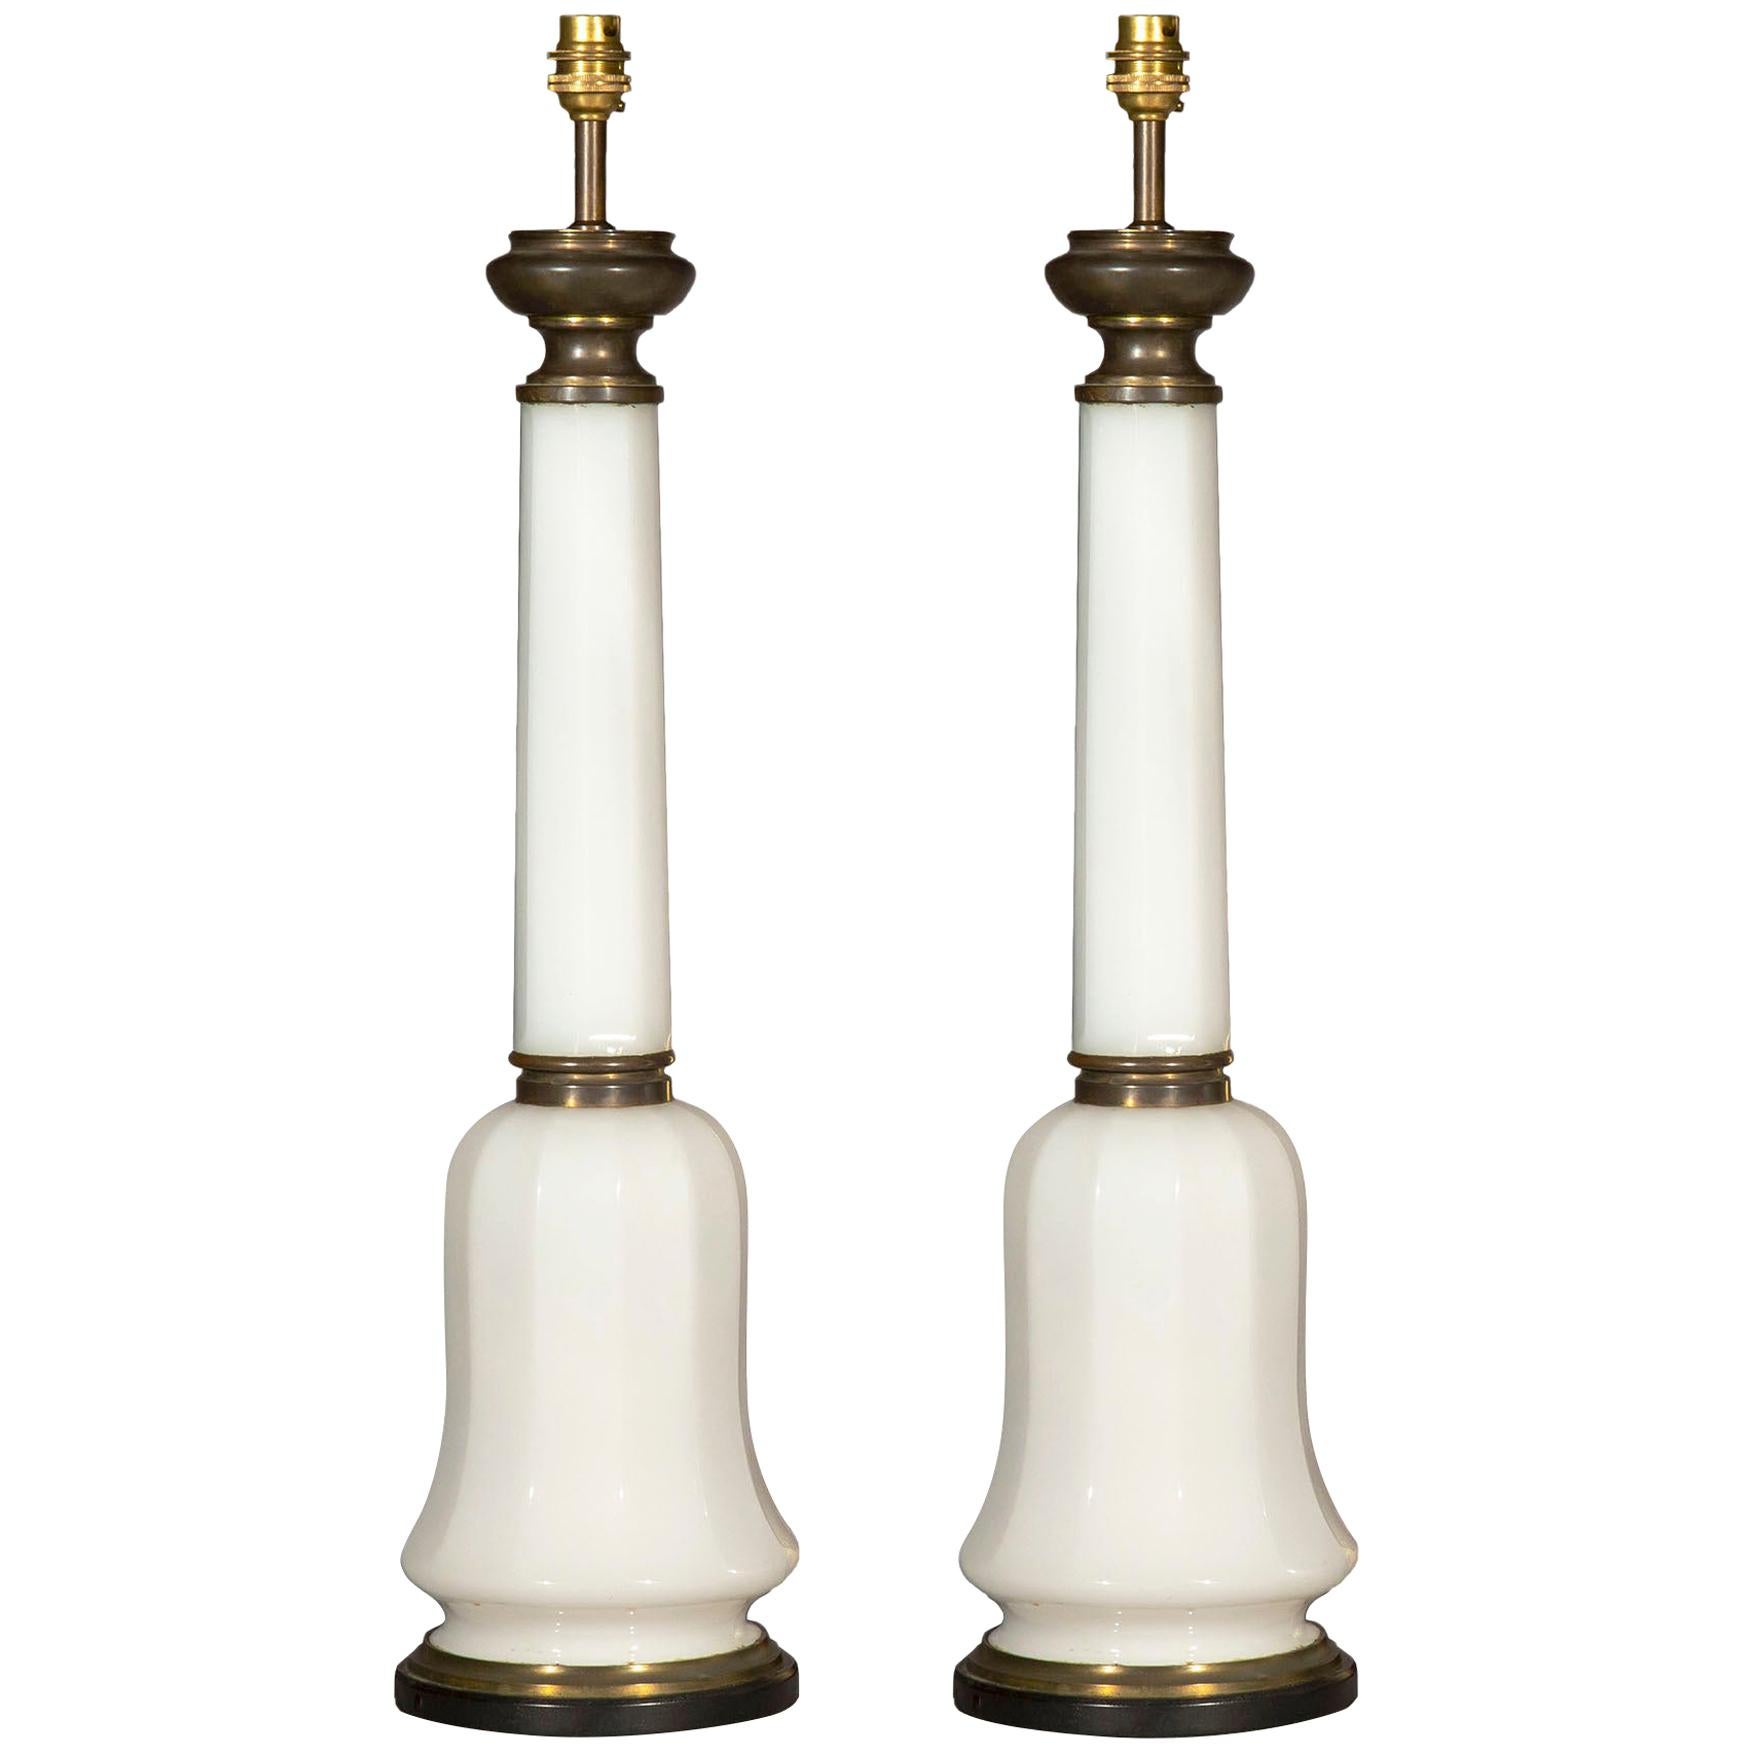 Pair of Antique Opaline Glass Table Lamps, 19th Century